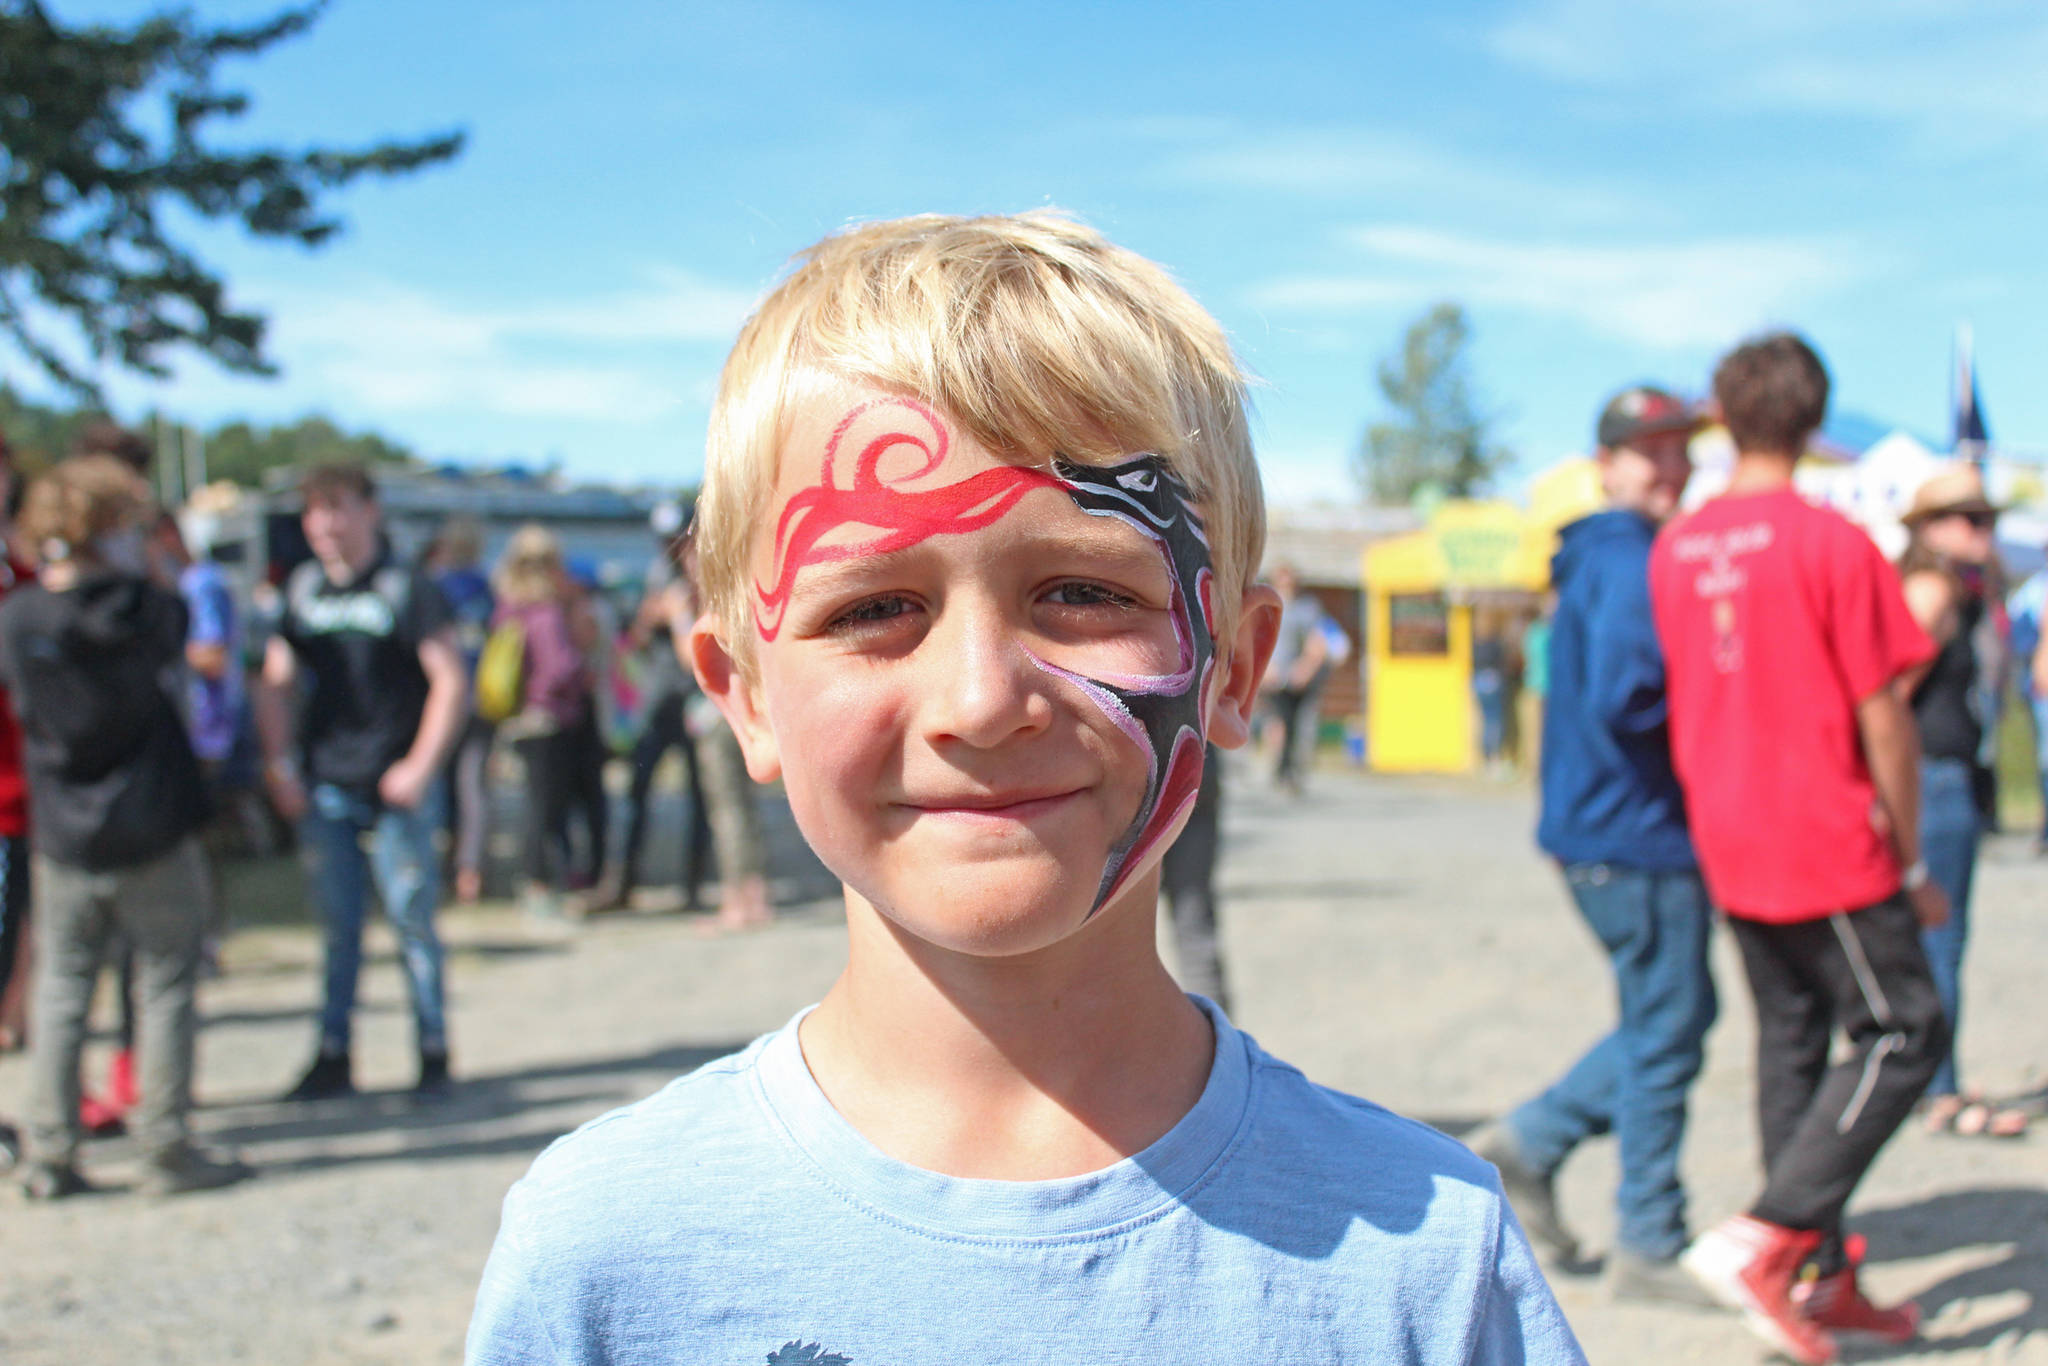 Iver Ledahl, 8, of Kenai, shows off the finished product of his face paint on Friday, Aug. 2, 2019 at Salmonfest in Ninilchik, Alaska. (Photo by Megan Pacer/Homer News)